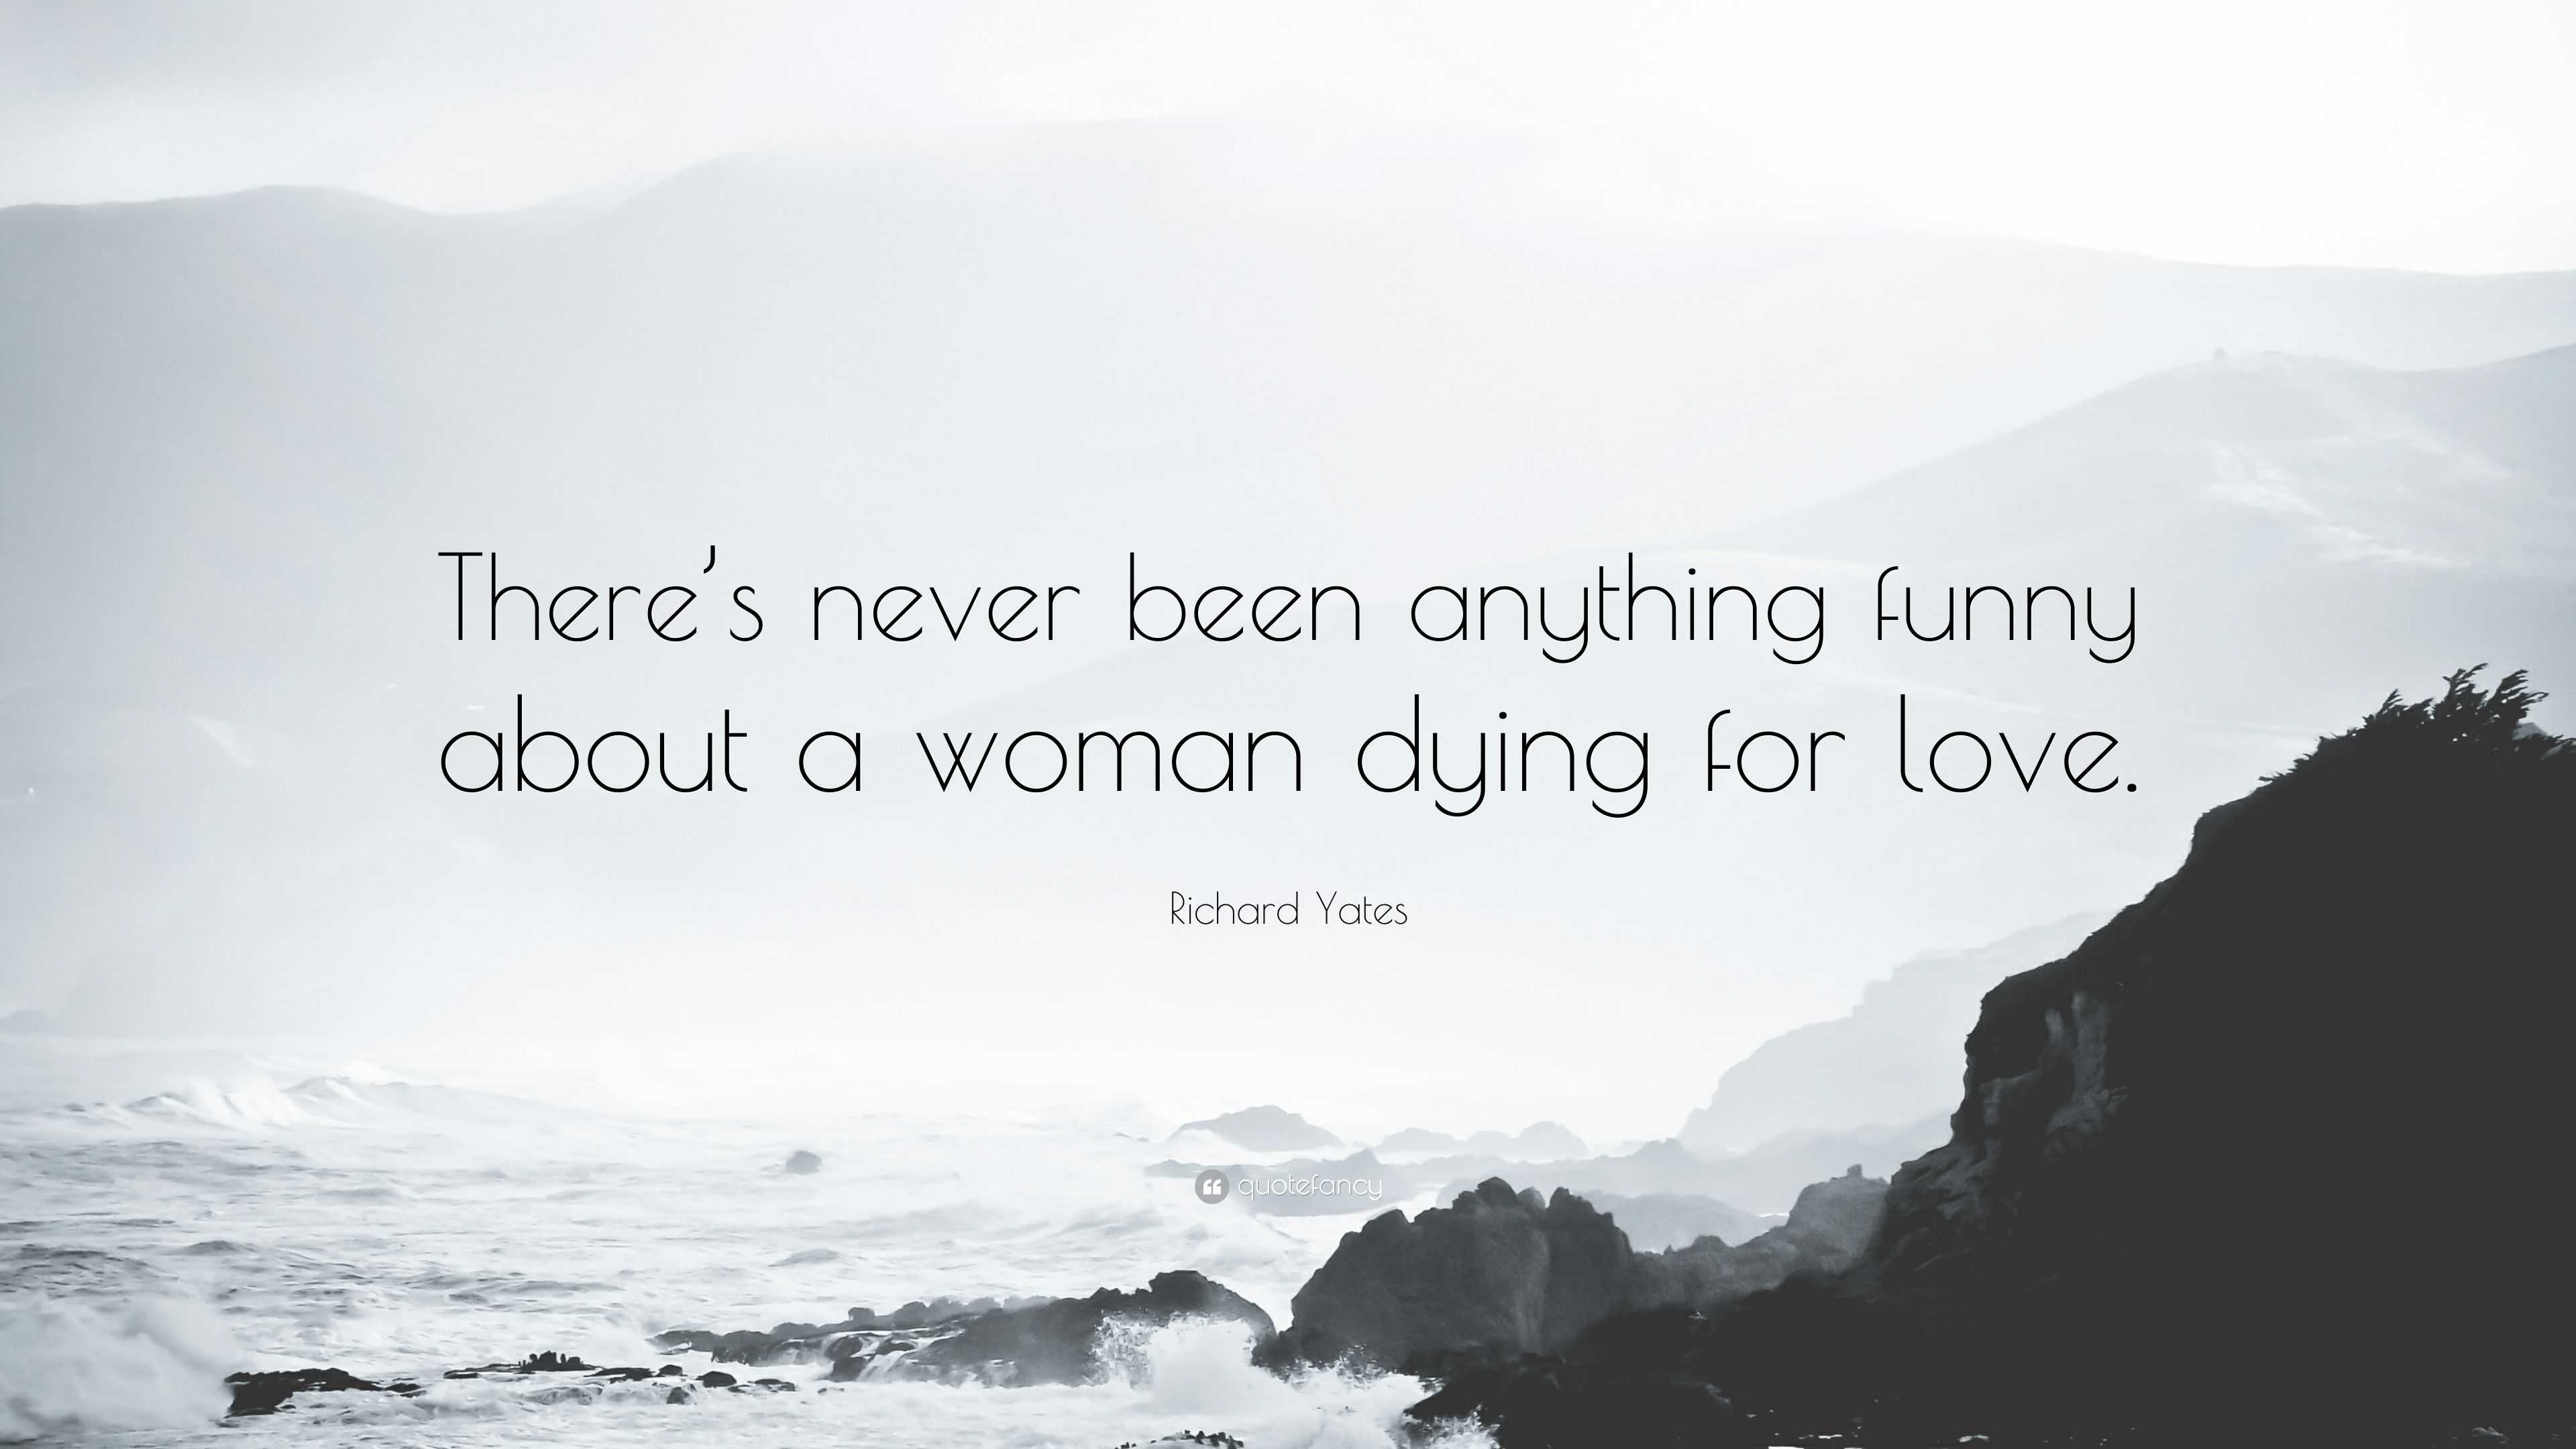 Richard Yates Quote: “There's never been anything funny about a woman dying  for love.”